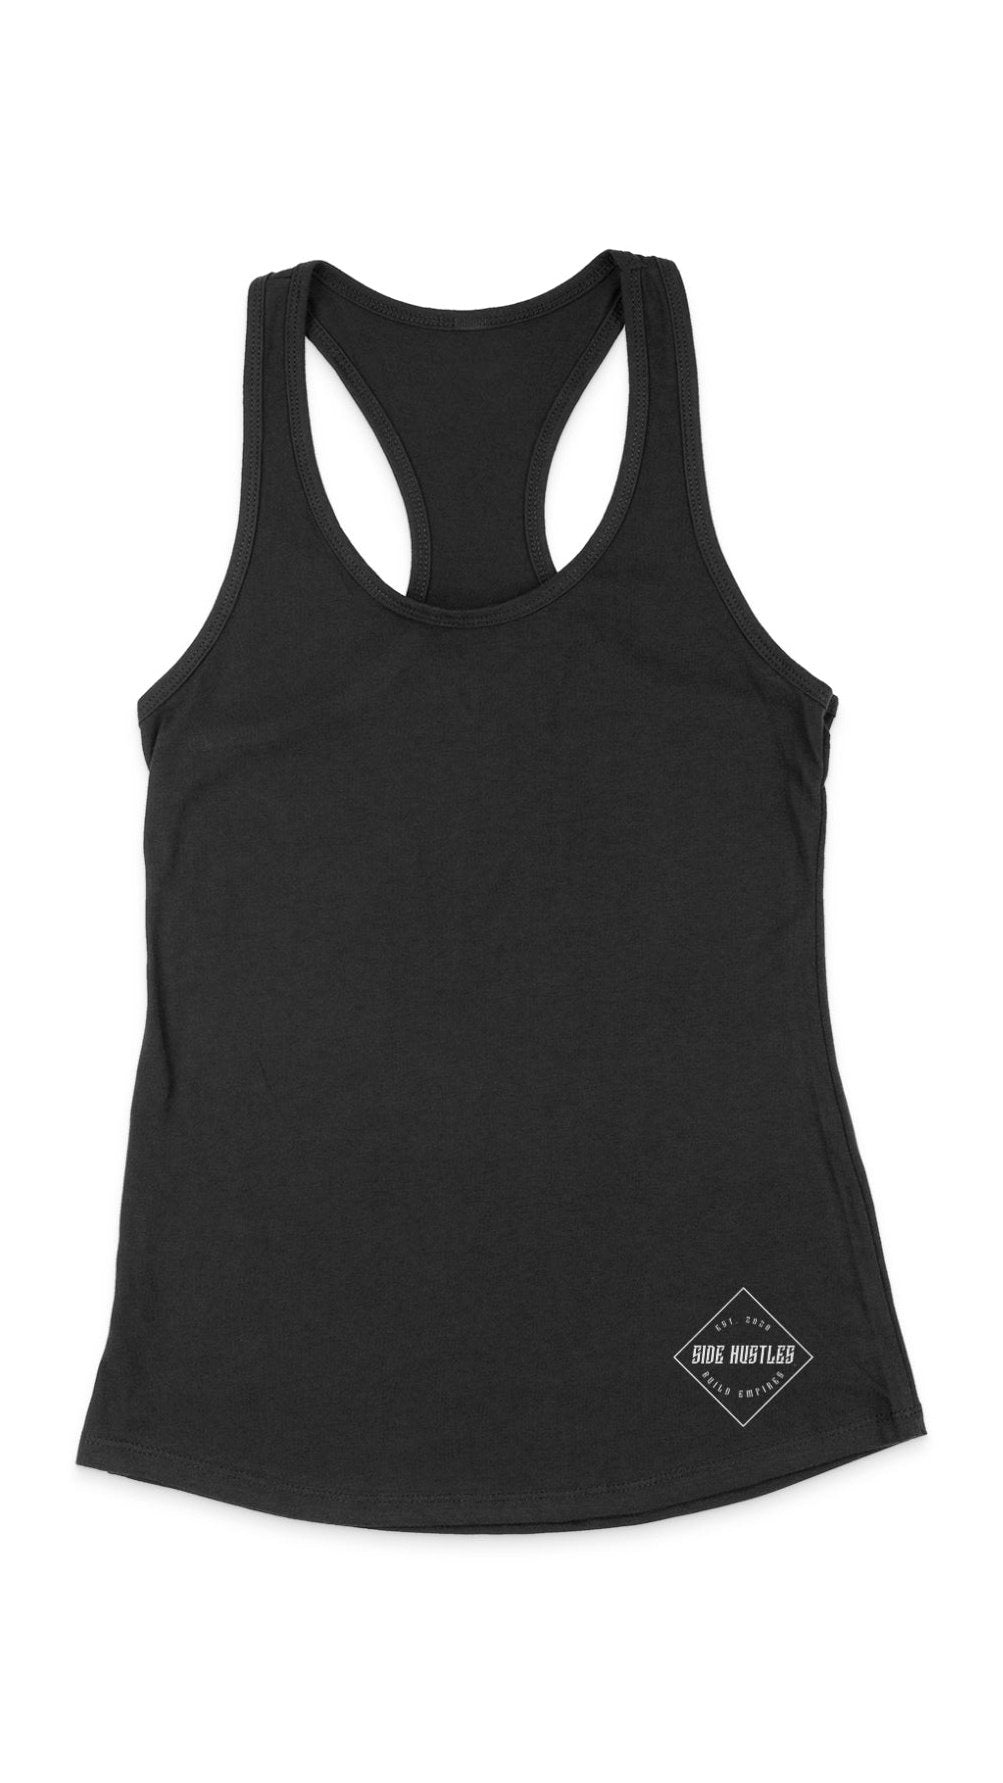 Black womens side hustle tank top with small white screen print on lower left side